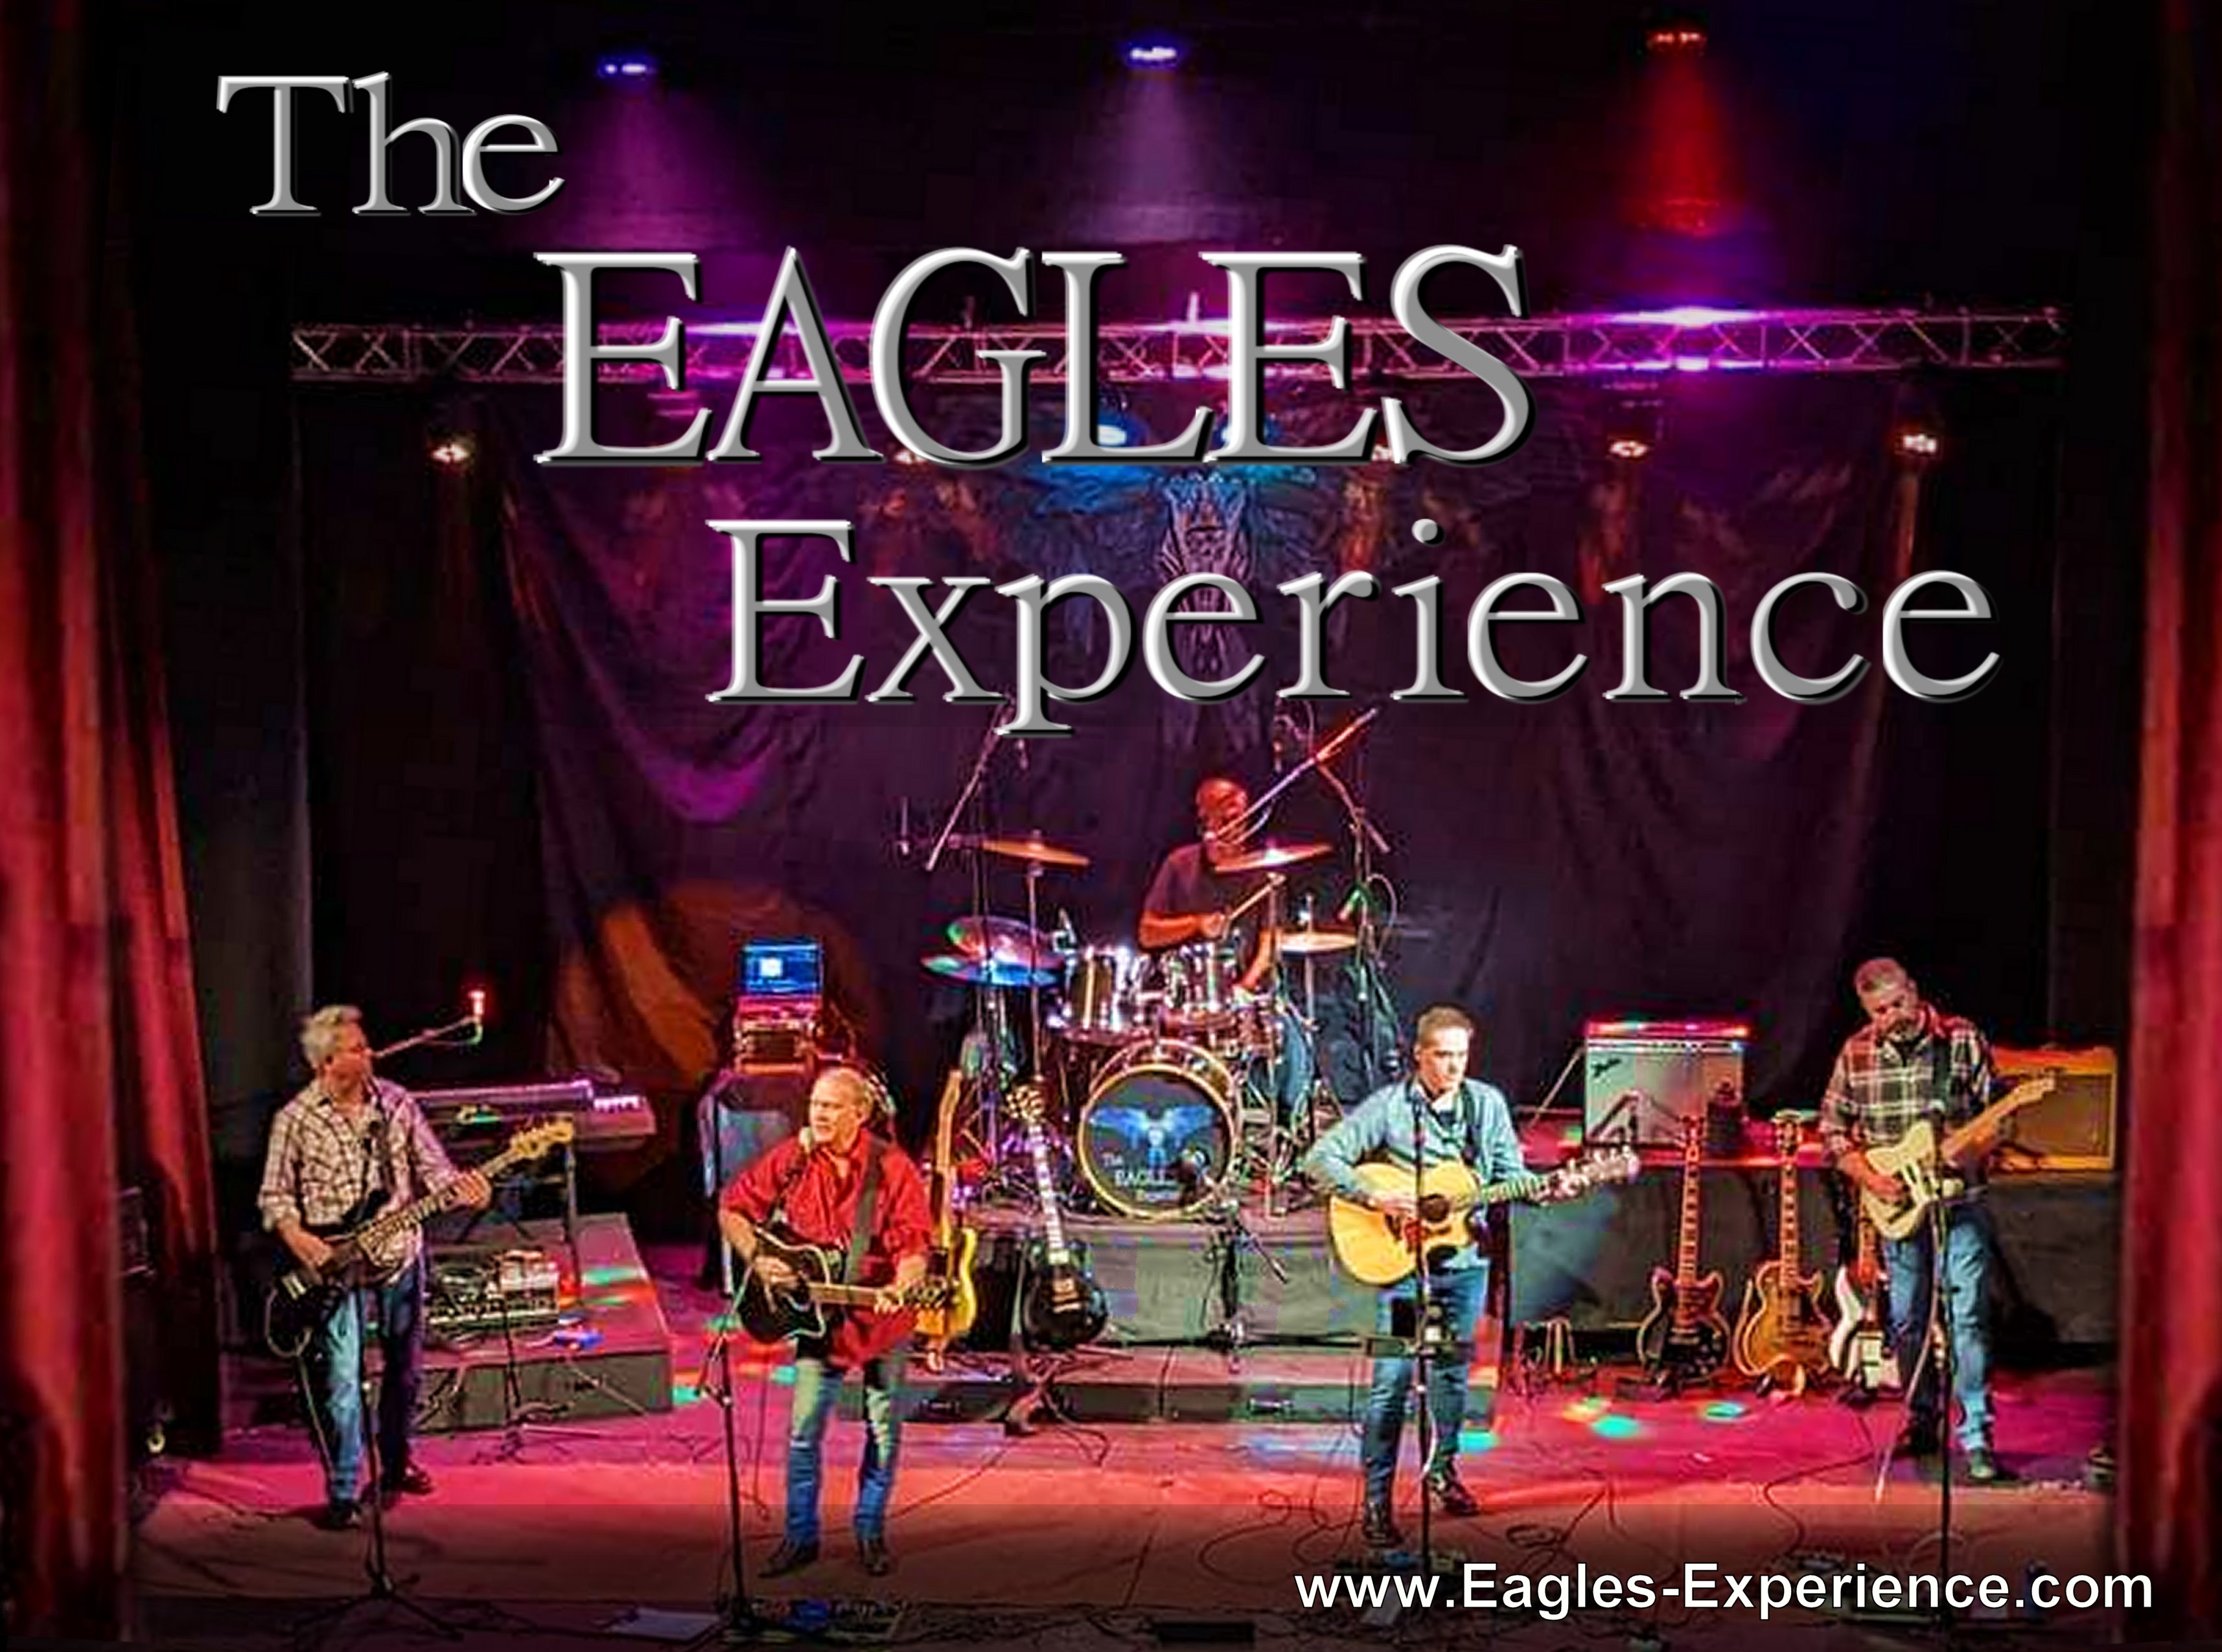 The Eagles Experience Photo 1.jpg